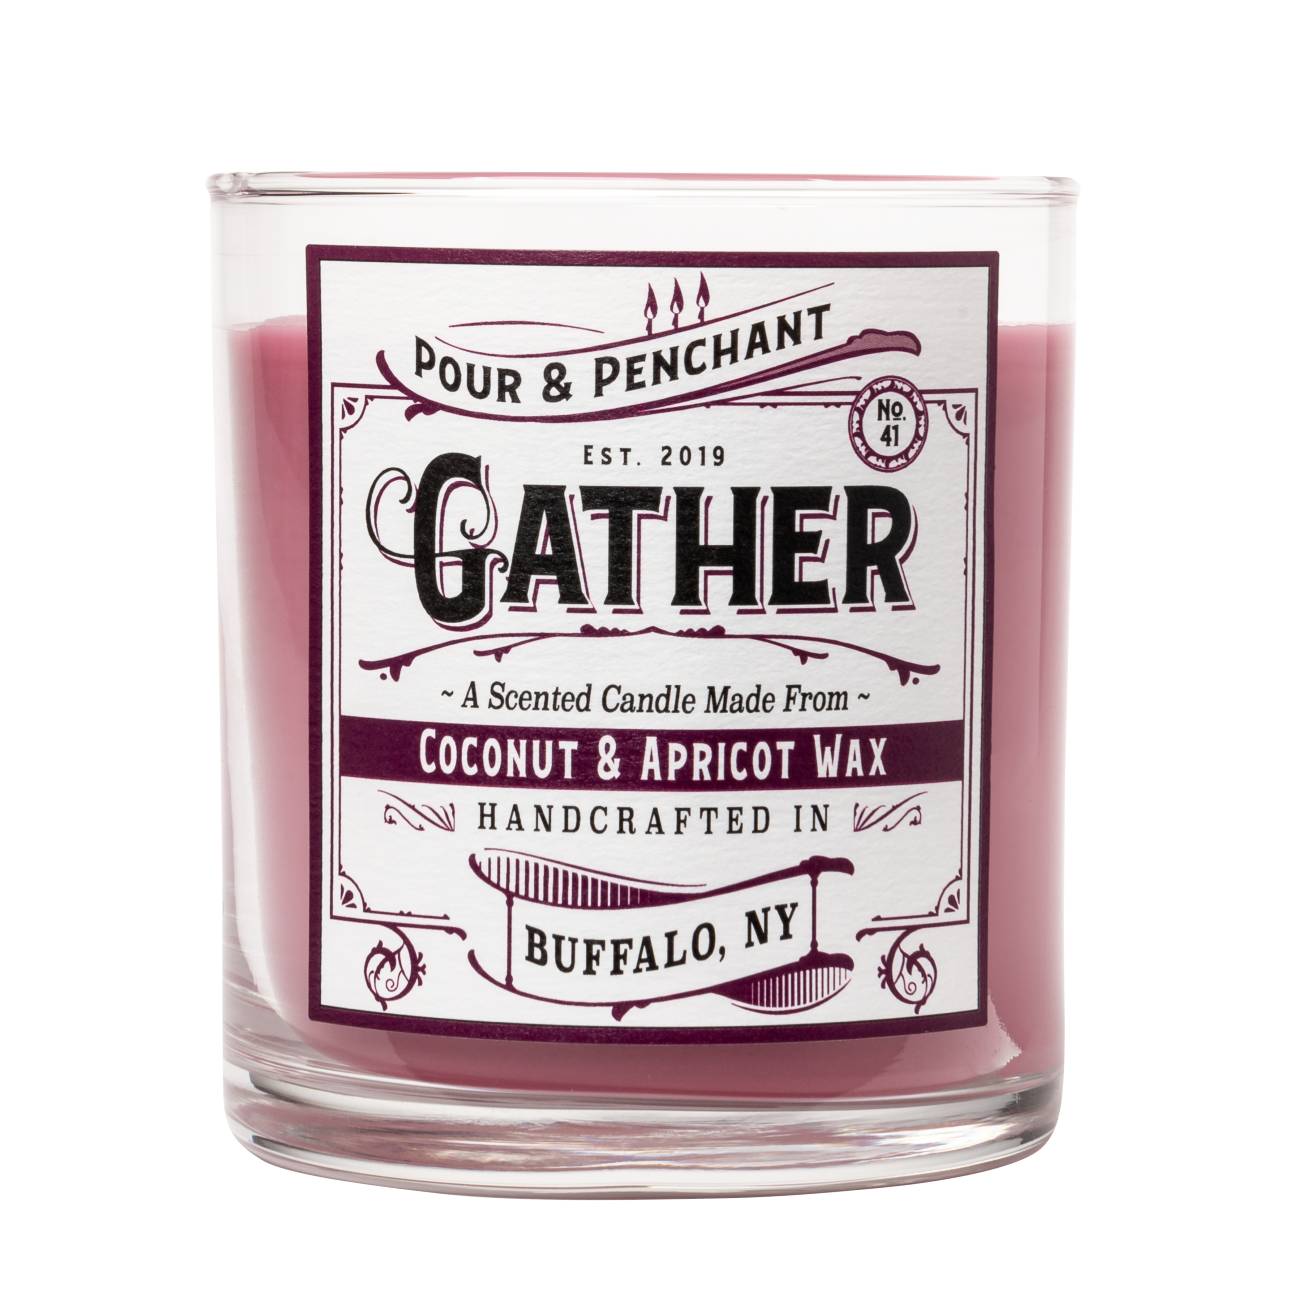 Pour & Penchant 10 oz Scented Candle - GATHER no.41 - Mediterranean Fig, Currant & Wood